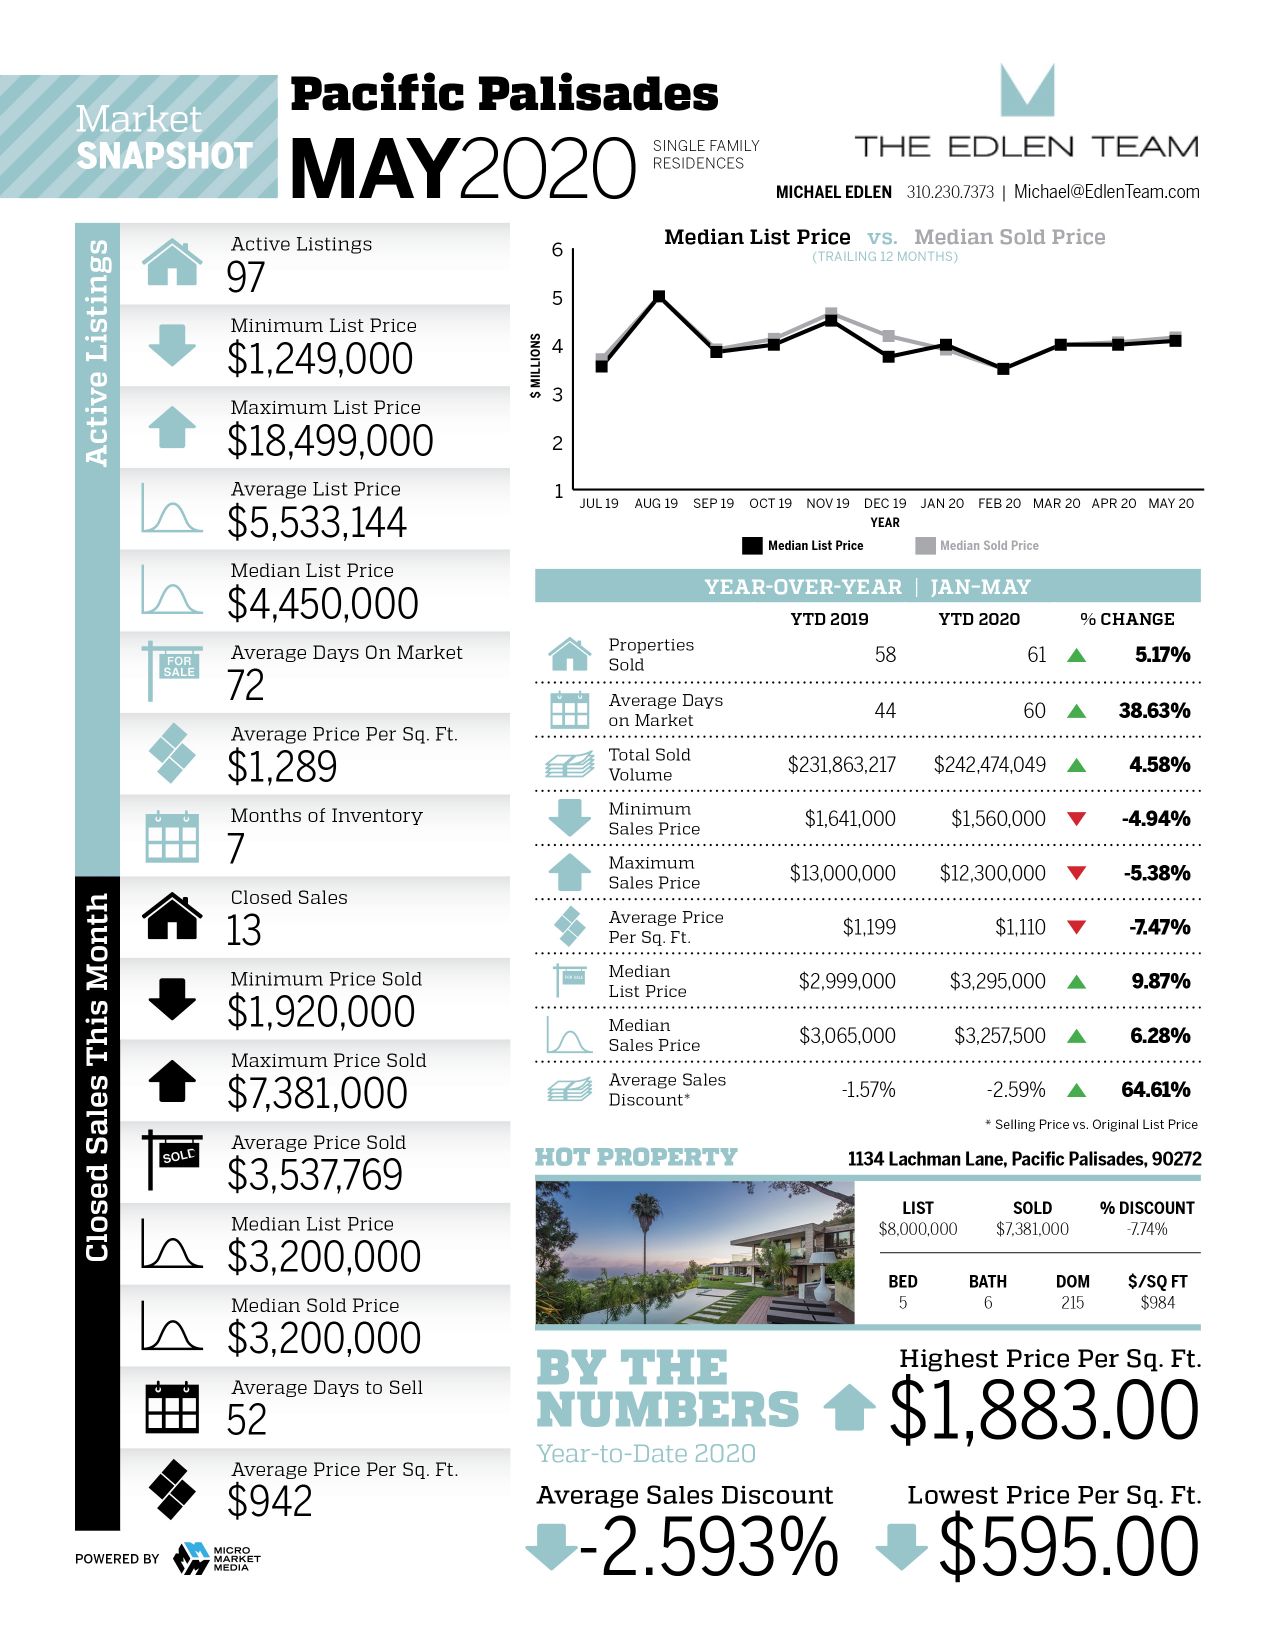 Pacific Palisades Market Report for May 2020